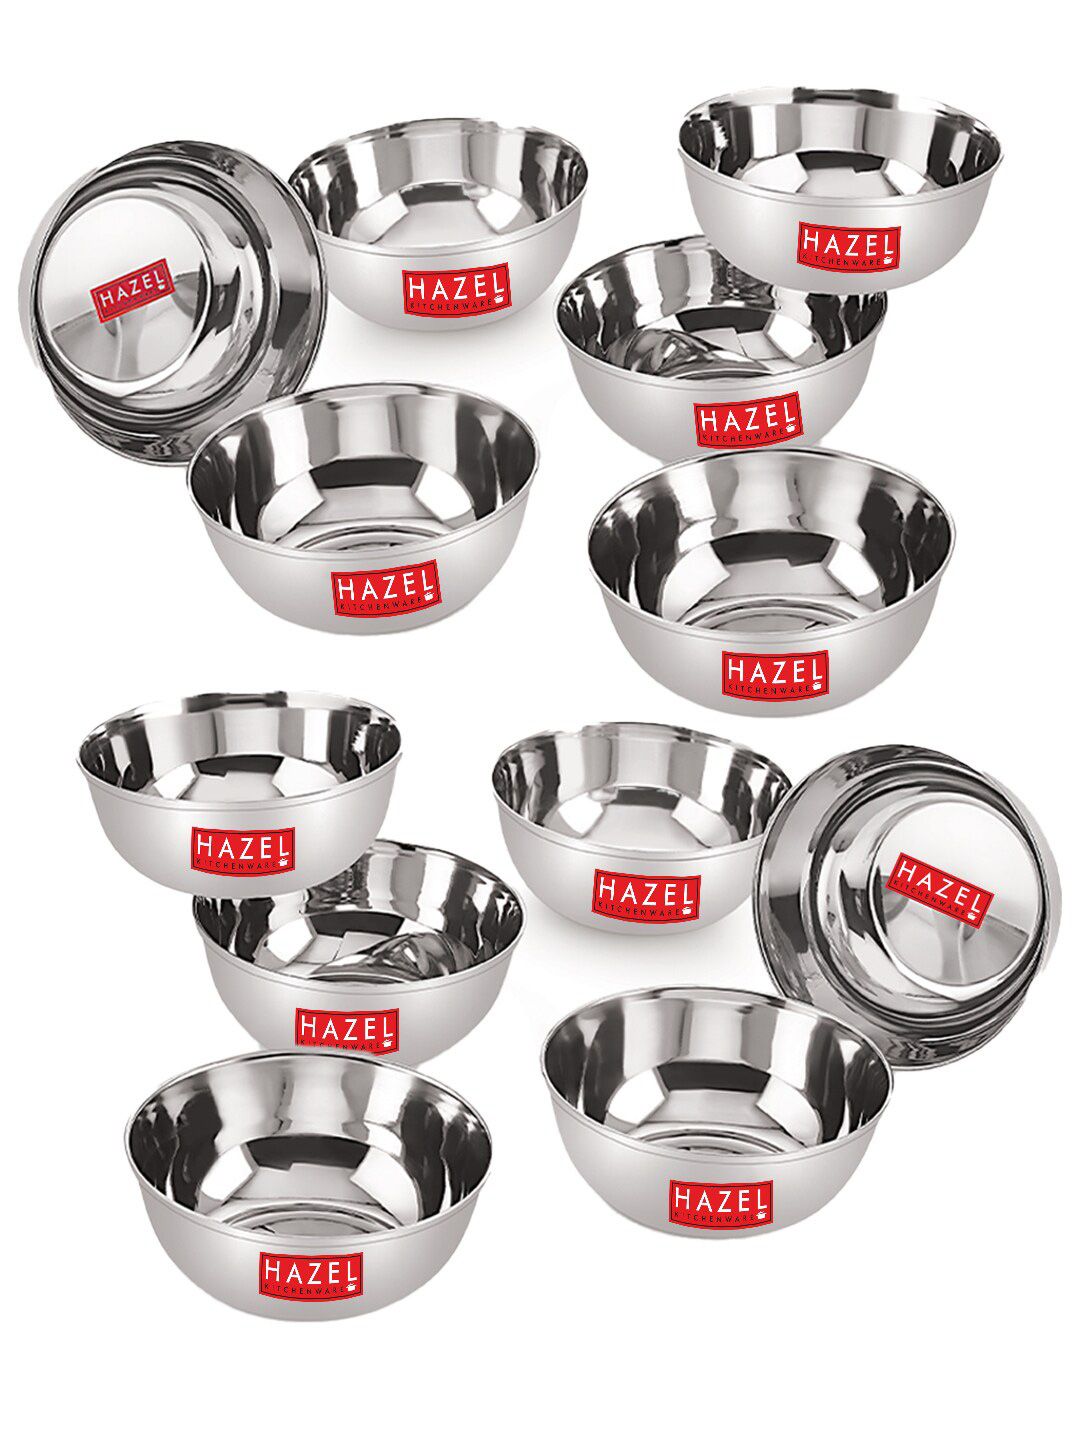 HAZEL Silver-Toned Set Of 12 Stainless Steel Bowl Set Price in India